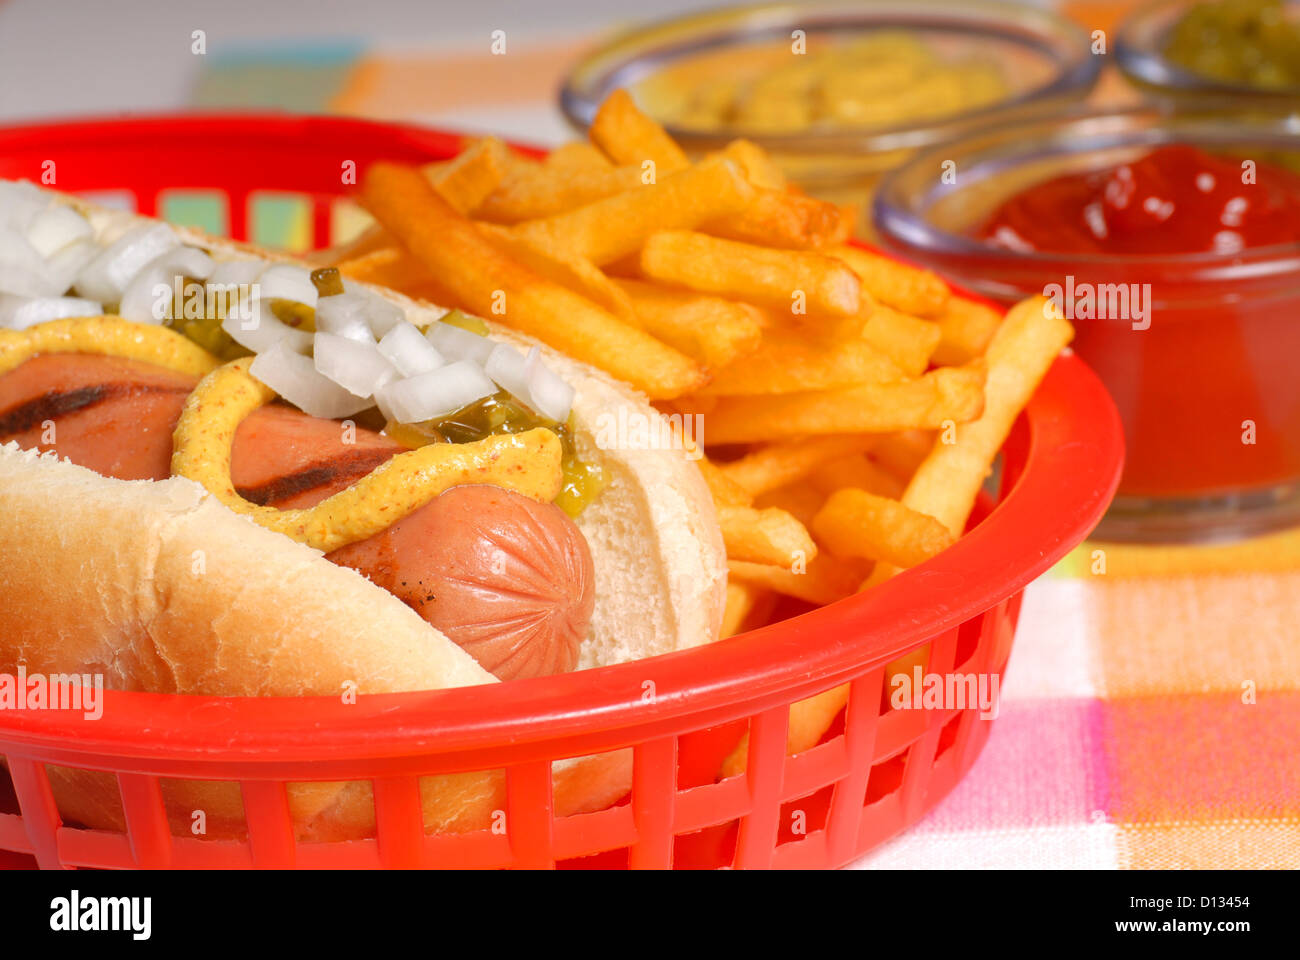 Freshly grilled hot dog with french fries and condiments Stock Photo